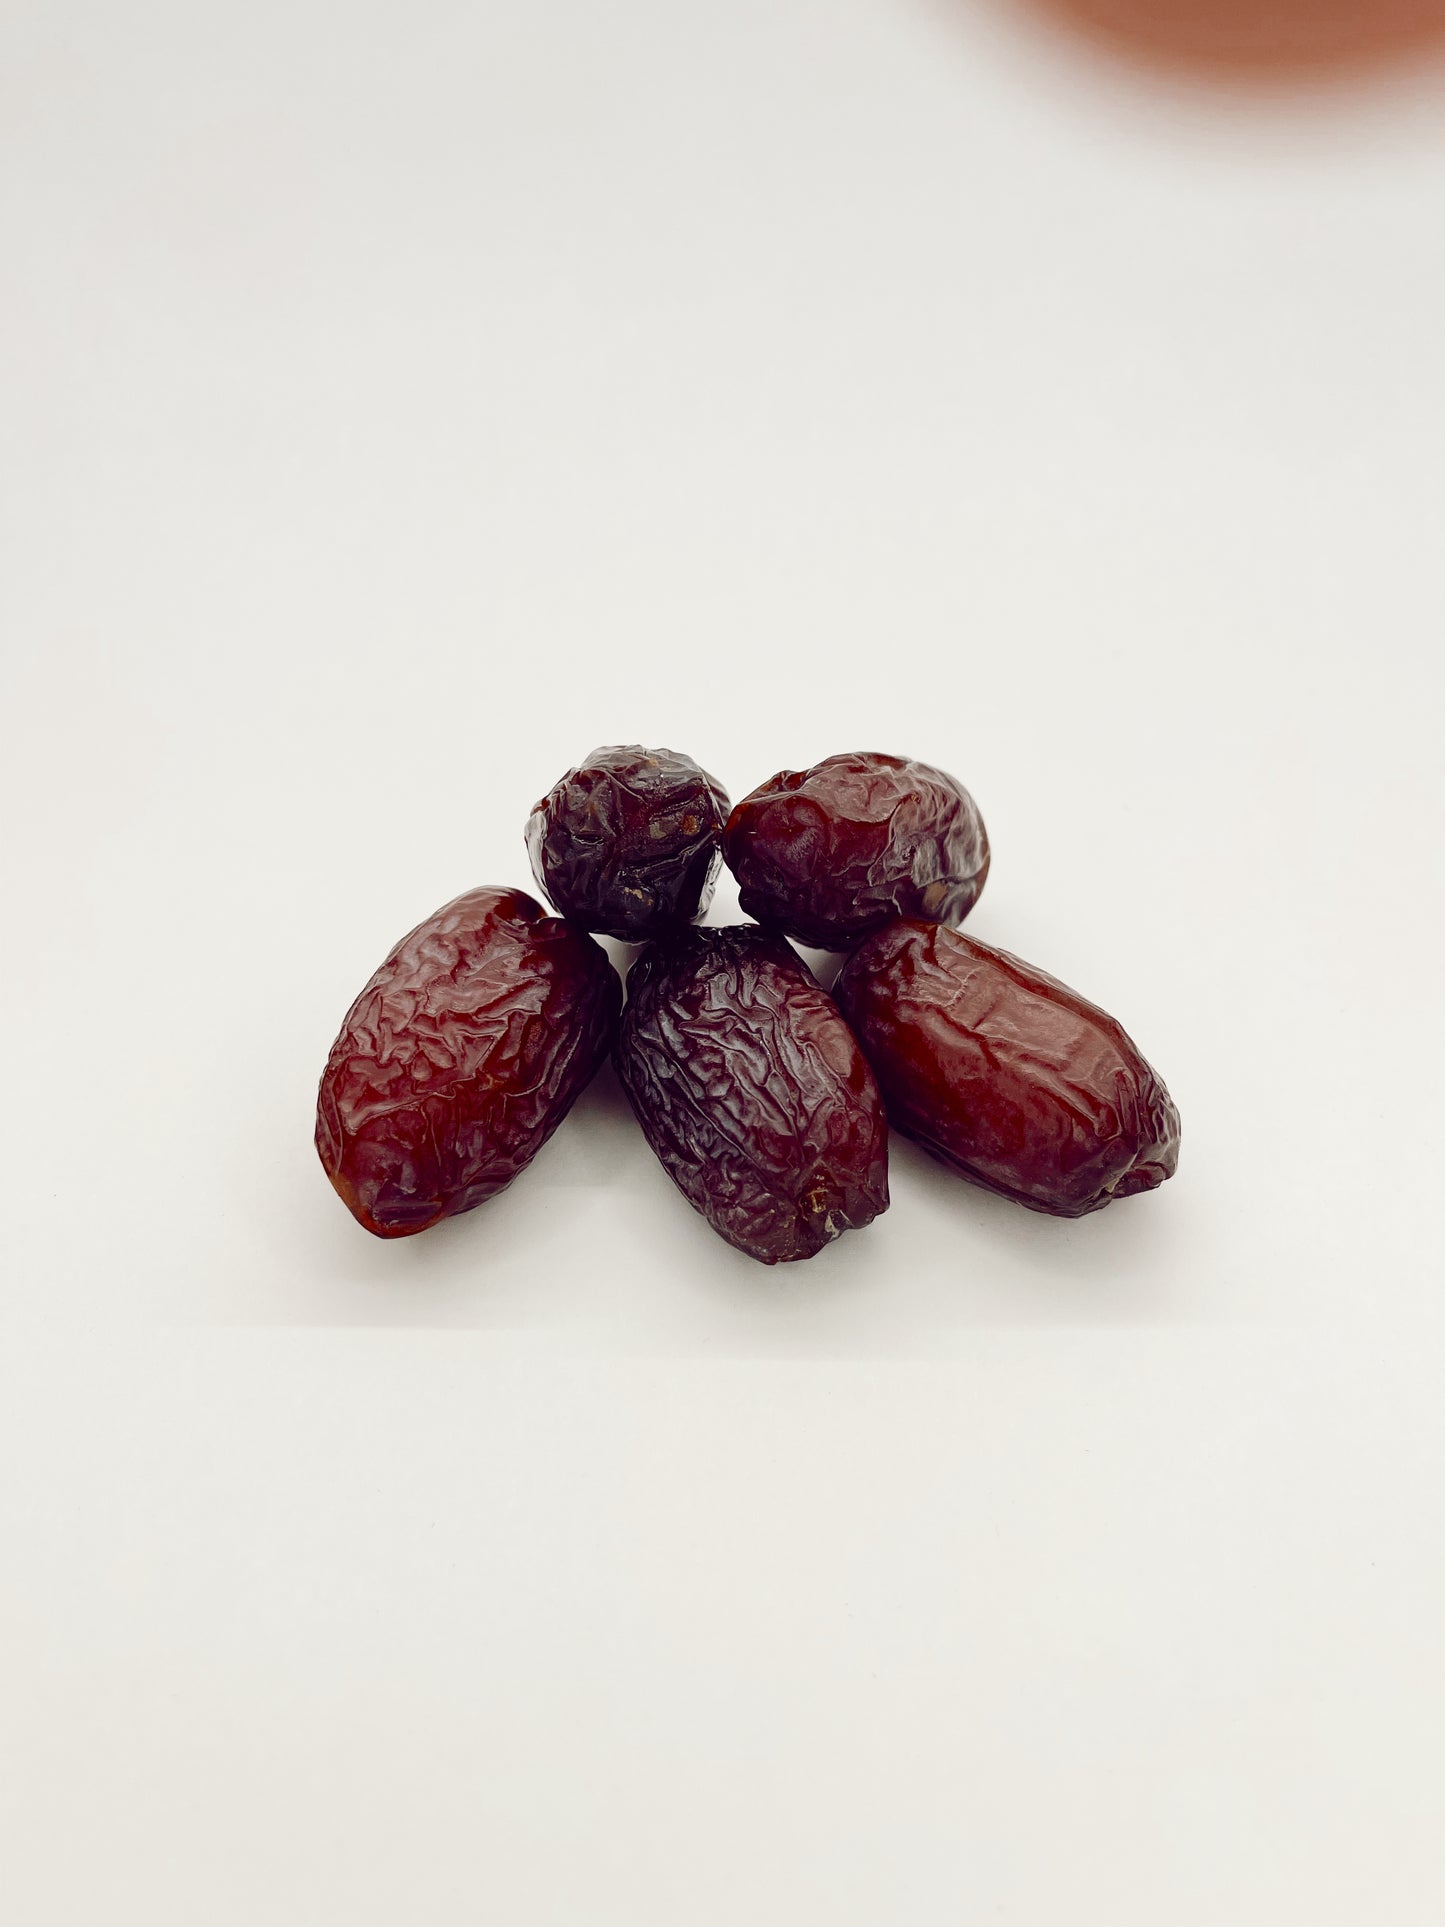 Frontal display of Jumbo Organic Medjool Dates highlighting their rich color and organic quality.